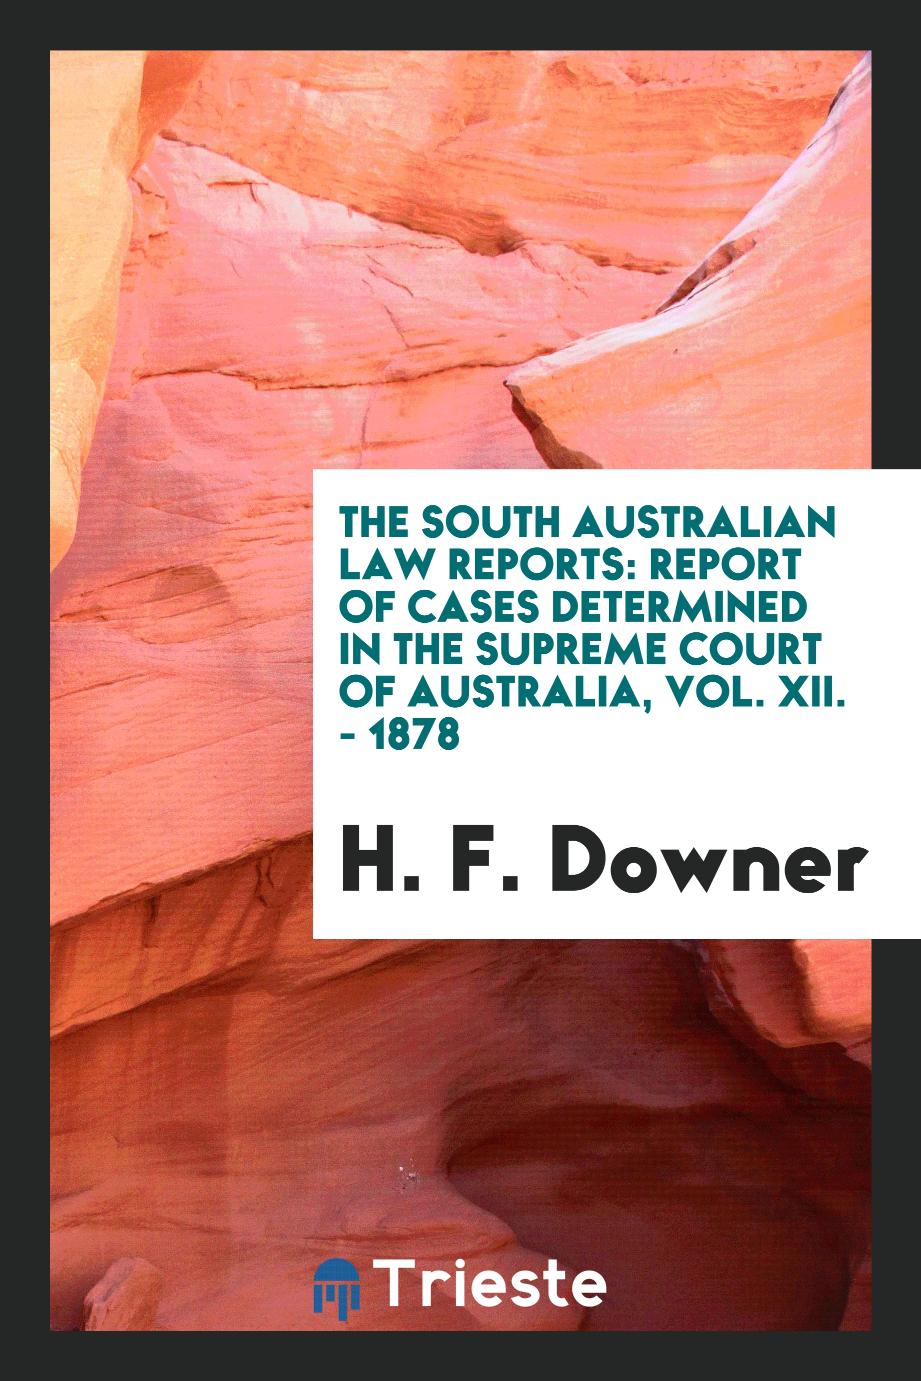 The South Australian Law Reports: Report of Cases Determined in the Supreme Court of Australia, Vol. XII. - 1878